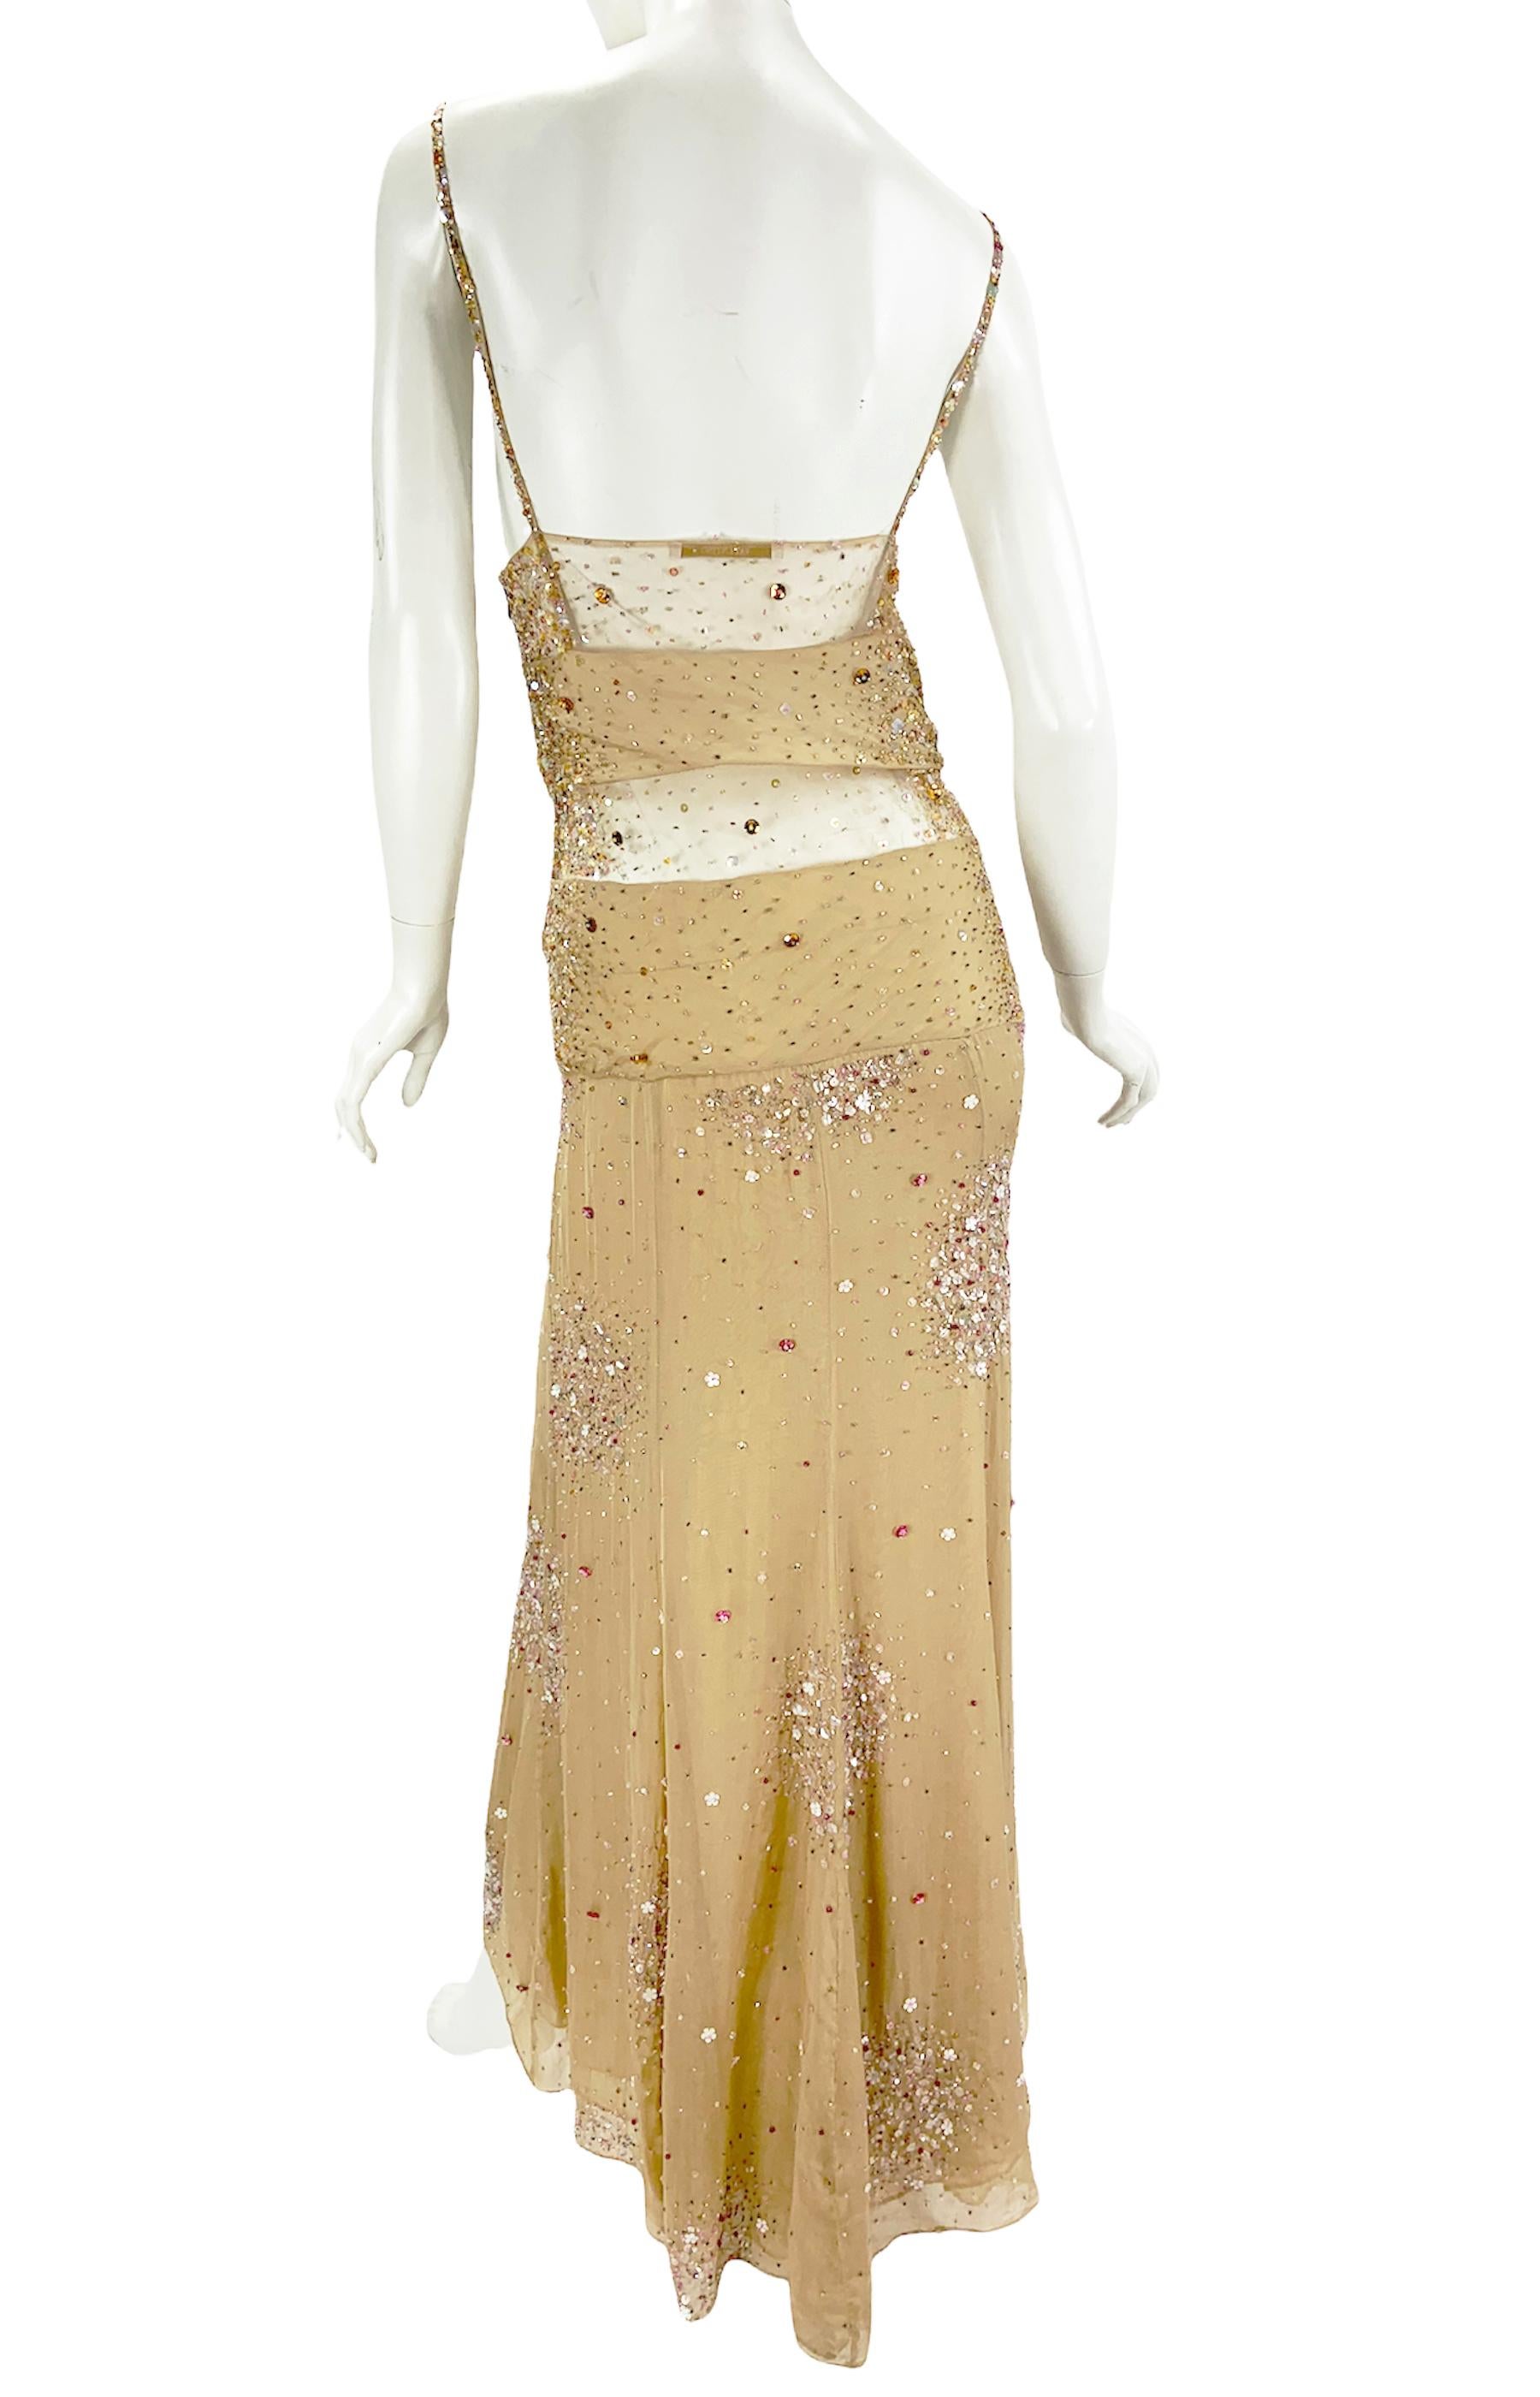 Vintage Valentino F/W 2000 Runway Nude Sexy Sheer Fully Embellished Dress Gown 8 For Sale 1